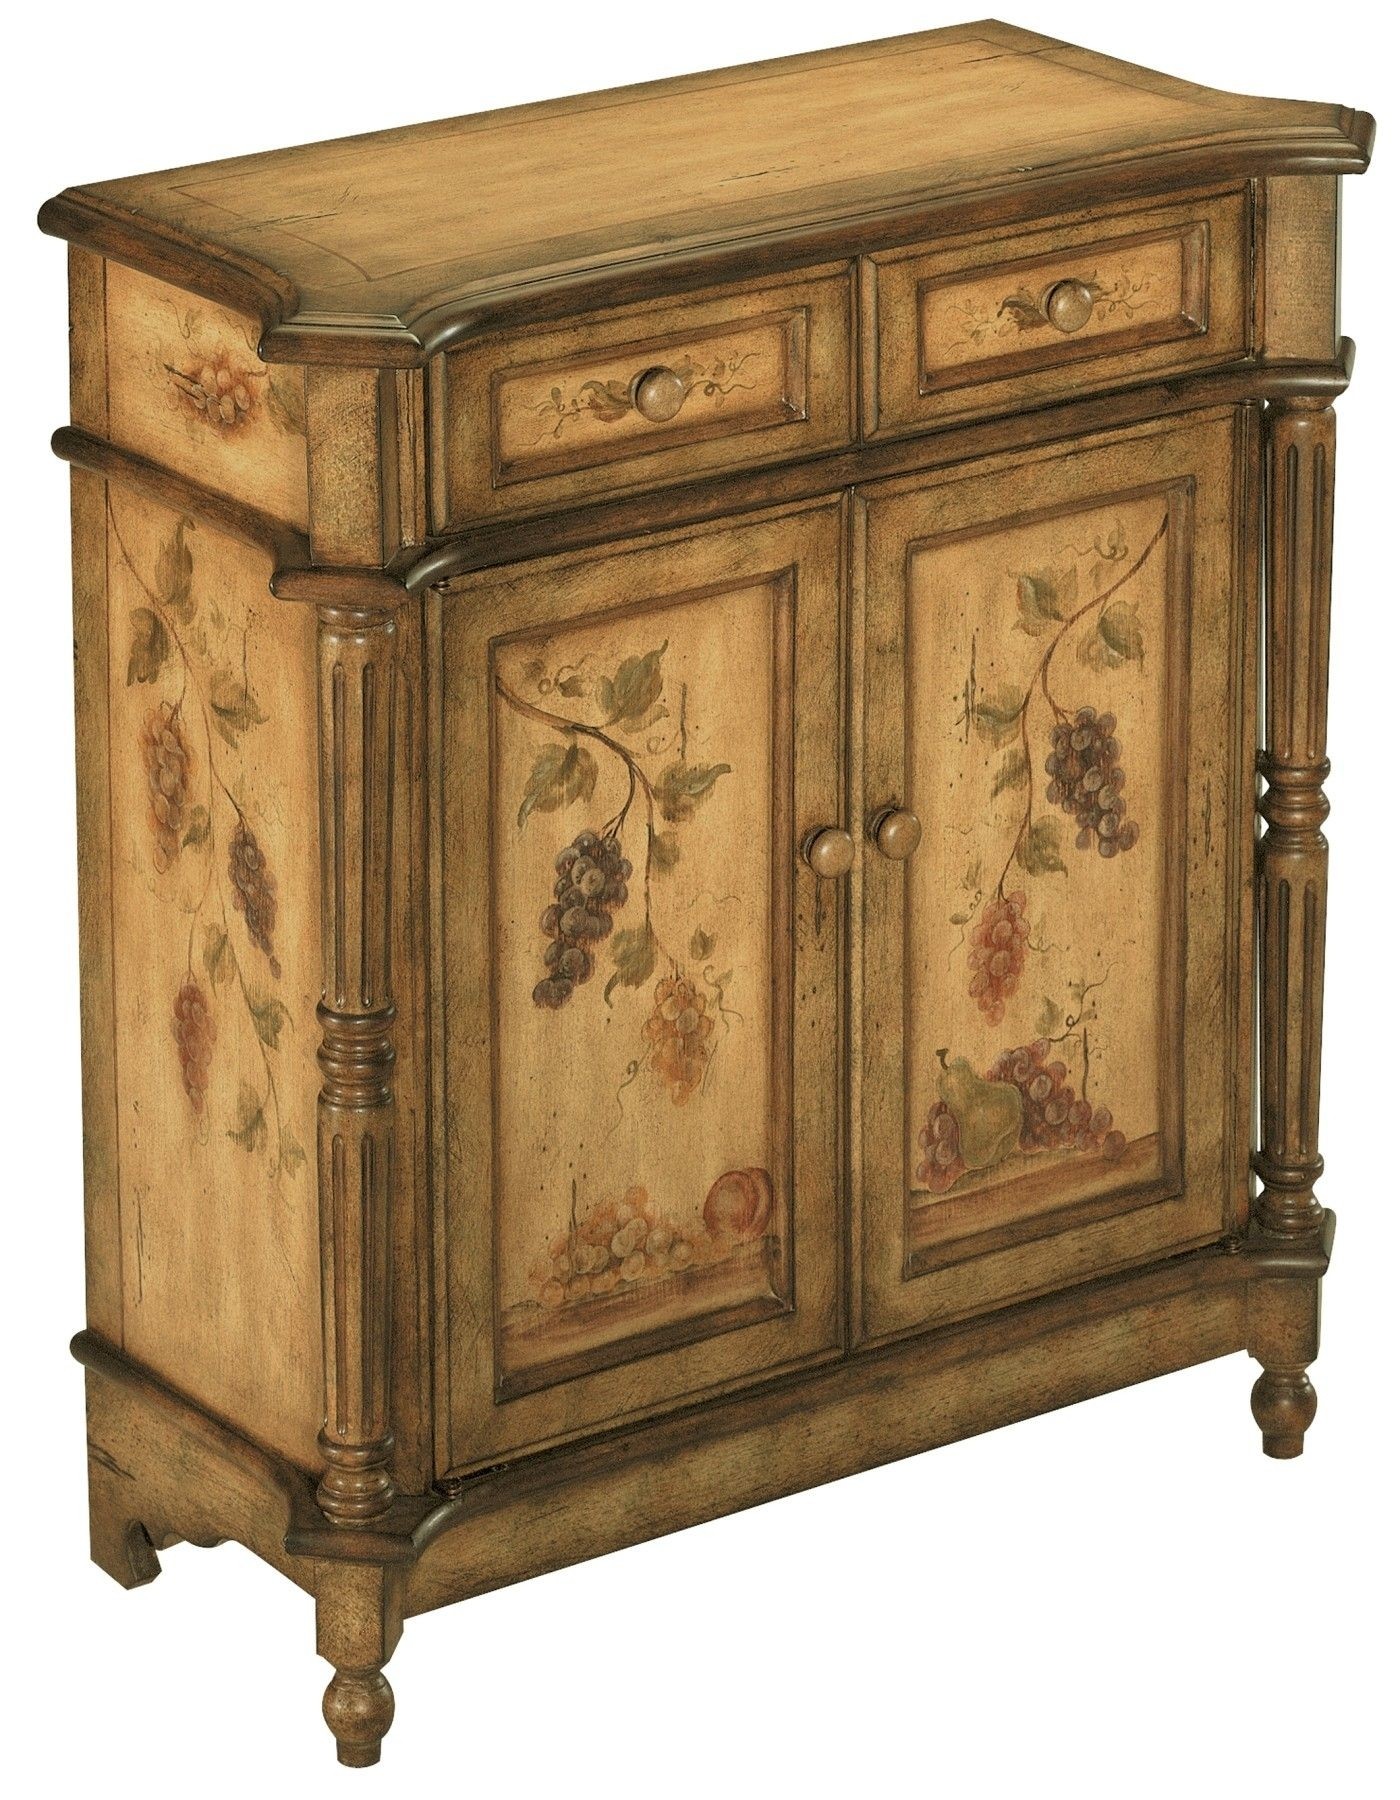 Stein World 70285 One Hand Painted Accent Cabinet in Antique Brown with Two Drawers and Two Doors, 30.25 by 13.75 by 32.75-Inch